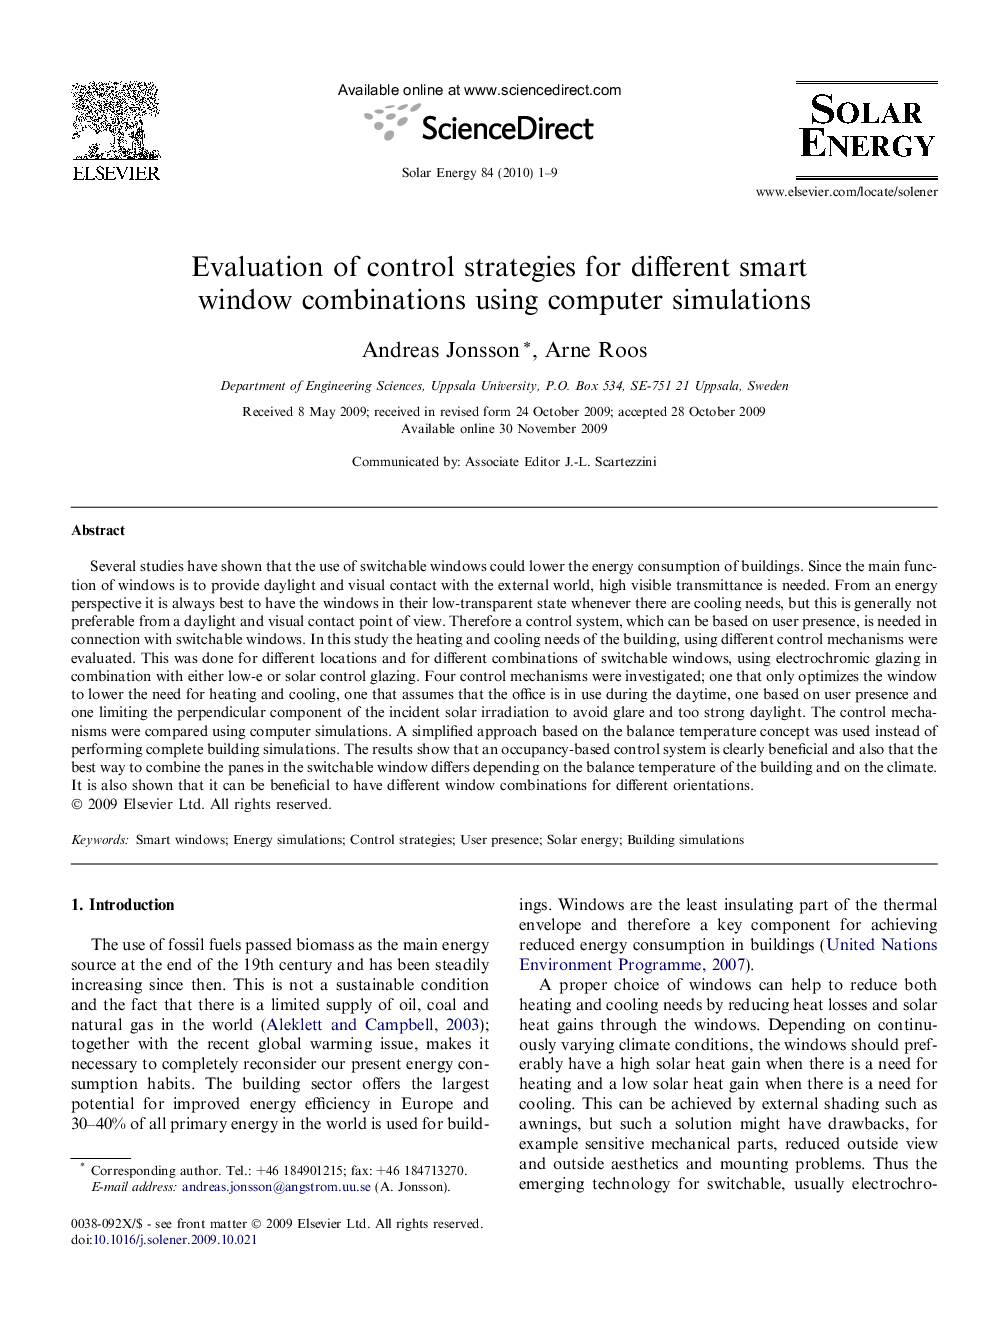 Evaluation of control strategies for different smart window combinations using computer simulations